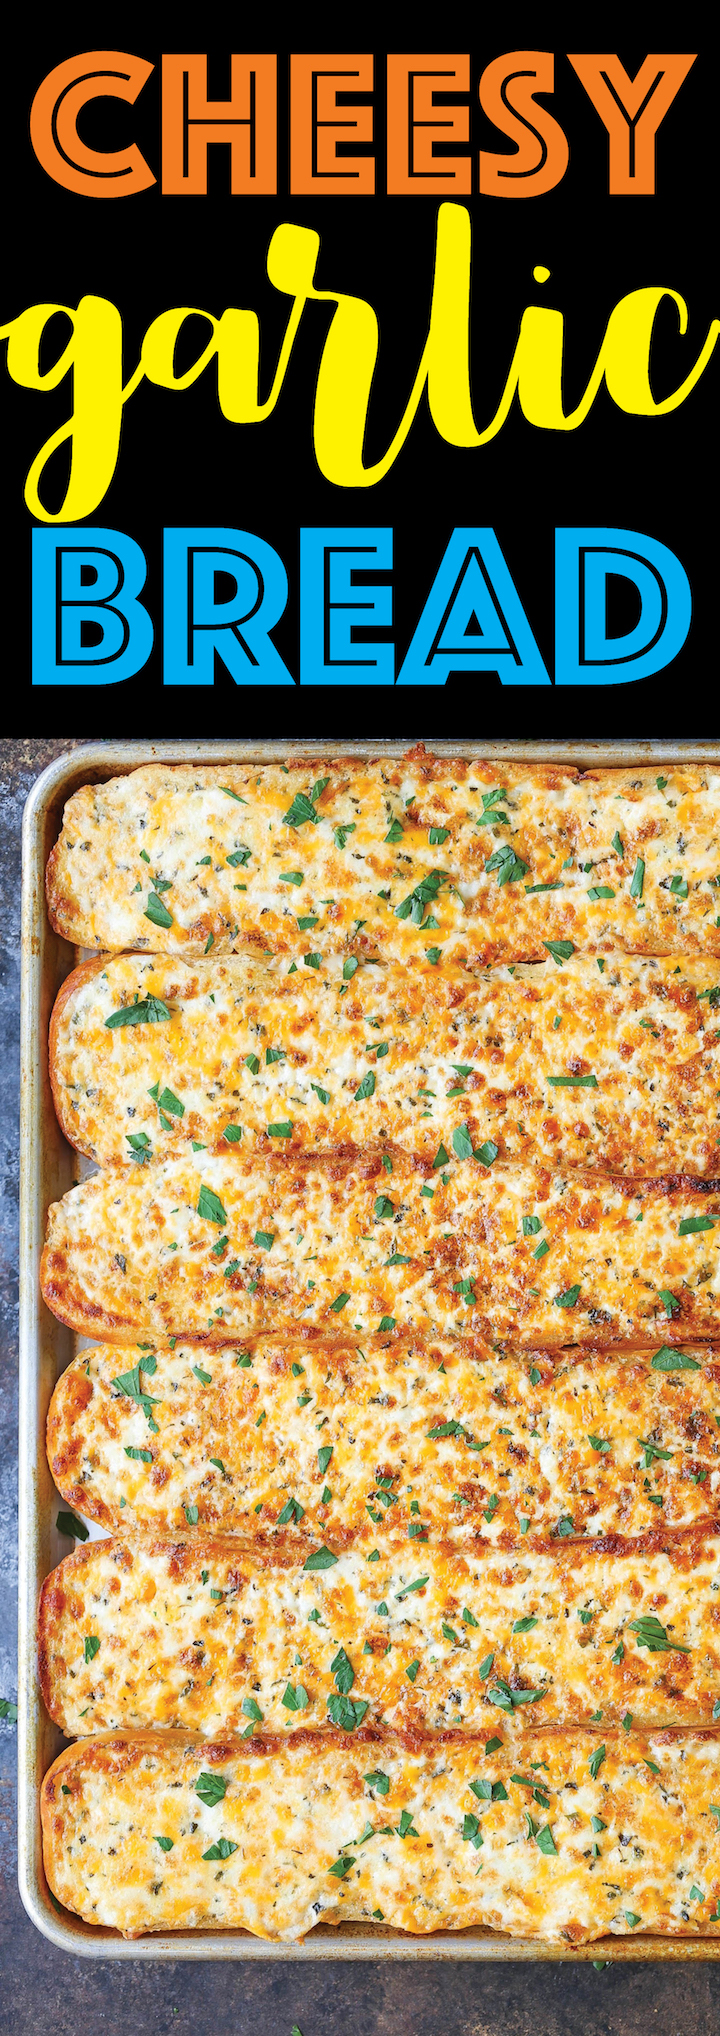 Cheesy Garlic Bread - One bite of this and everyone will beg you to make this again and again! So cheesy, so ooey gooey and so melt-in-your-mouth AH-MAZING!